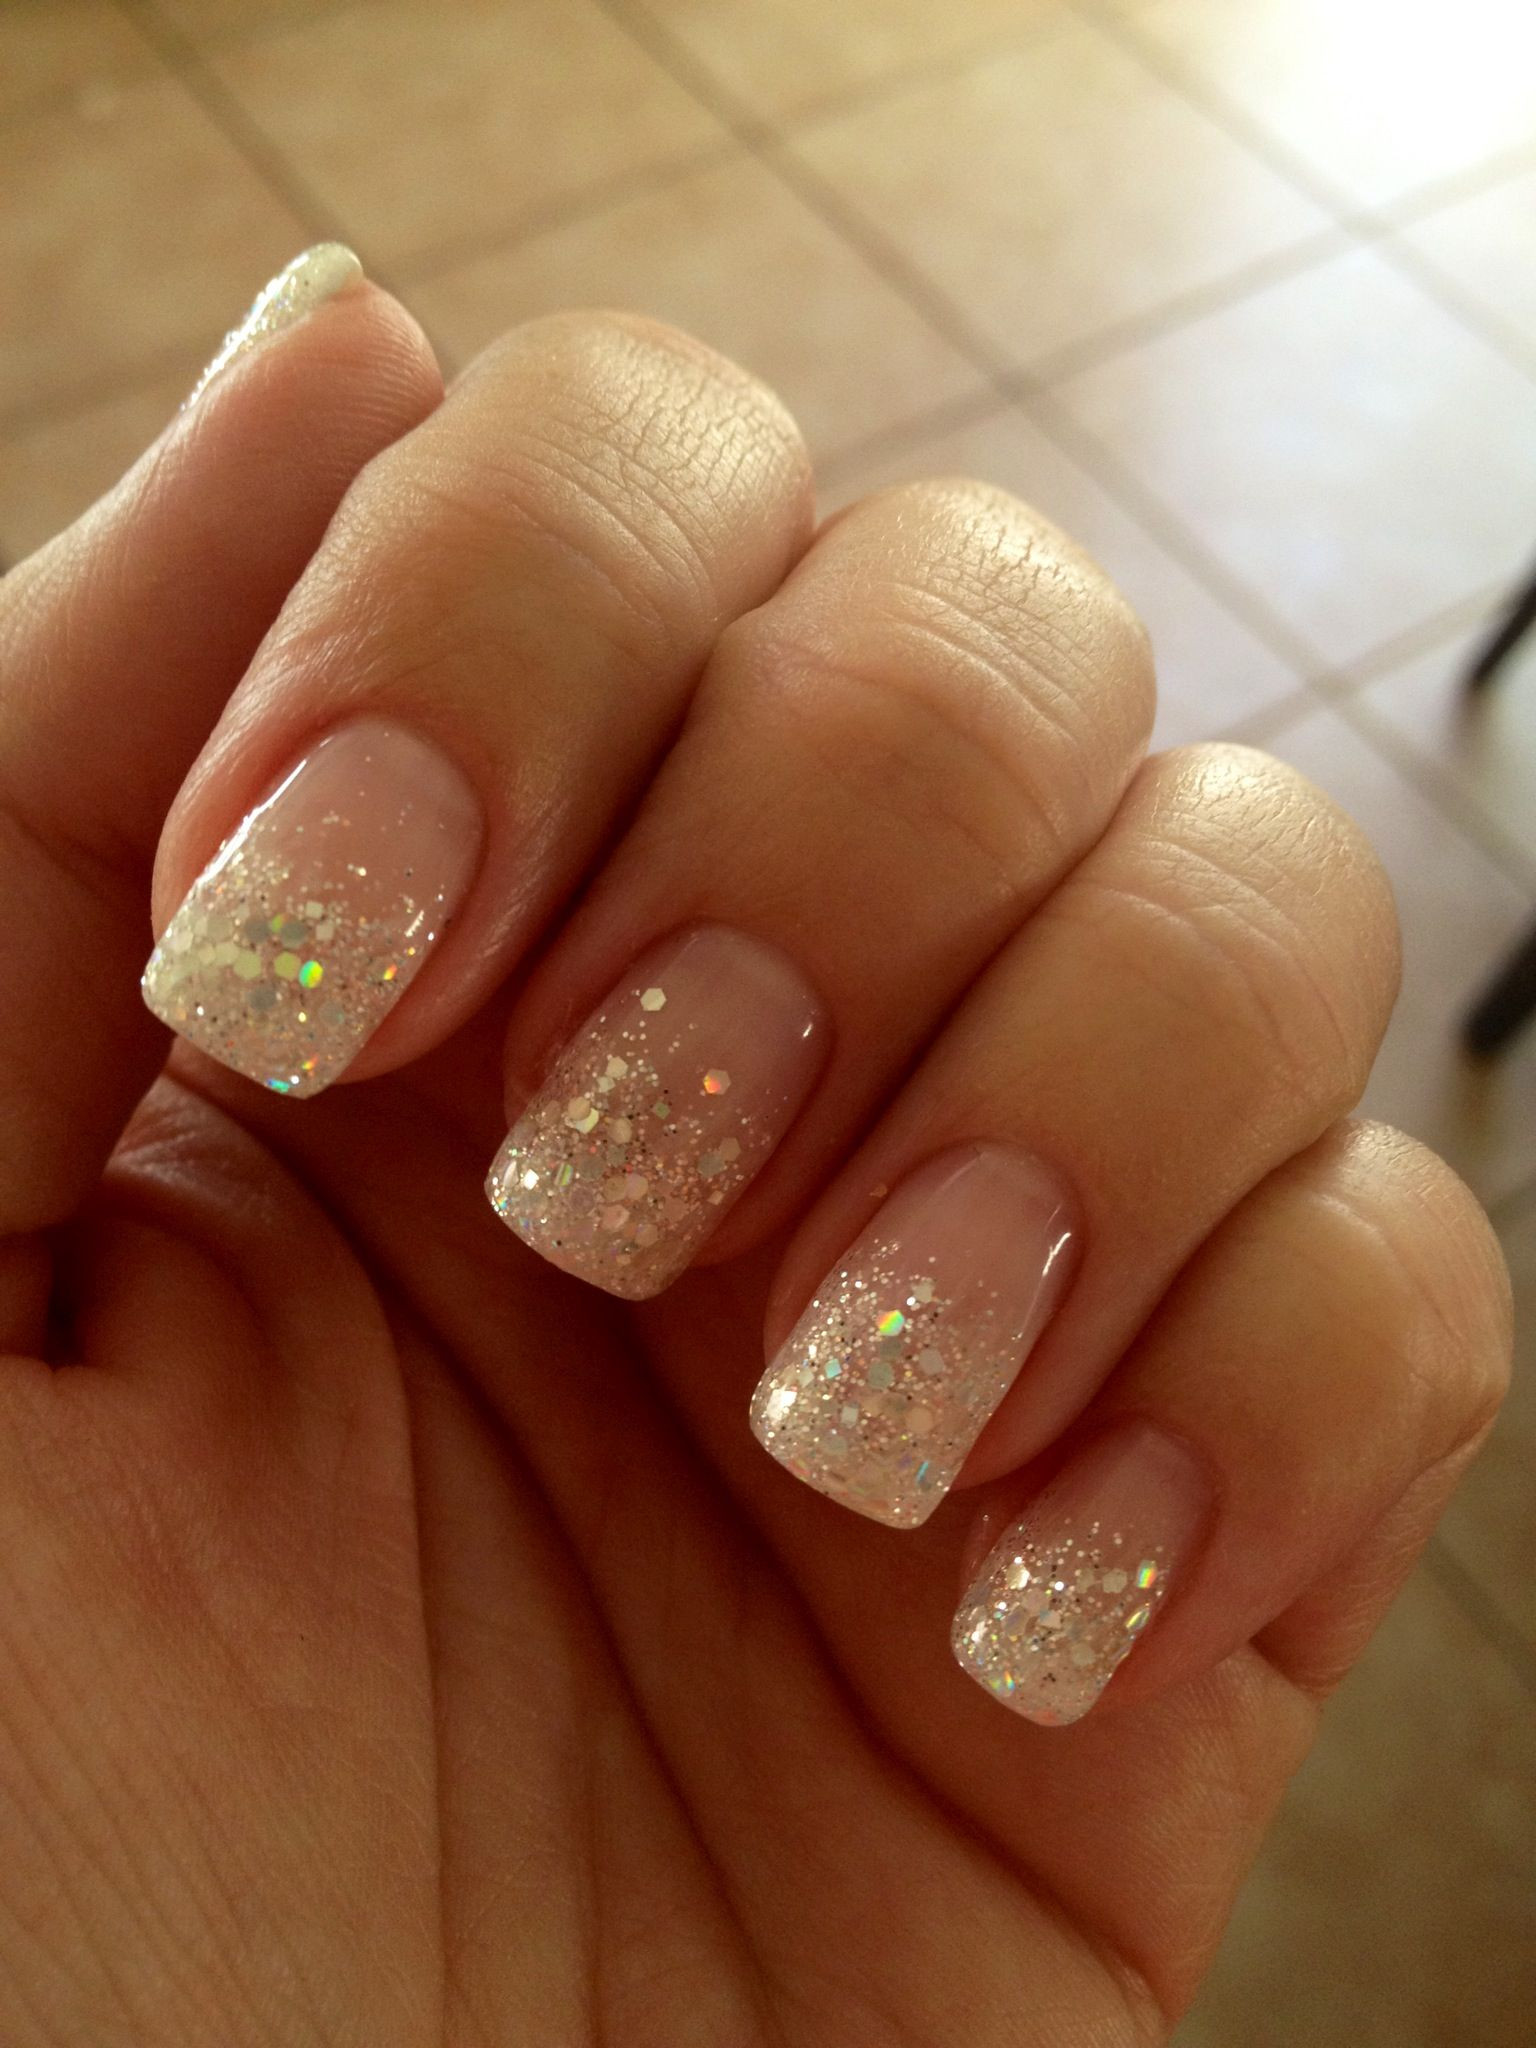 French Ombre Nails With Glitter
 Glitter French Manicure Fade Can you say wedding nails